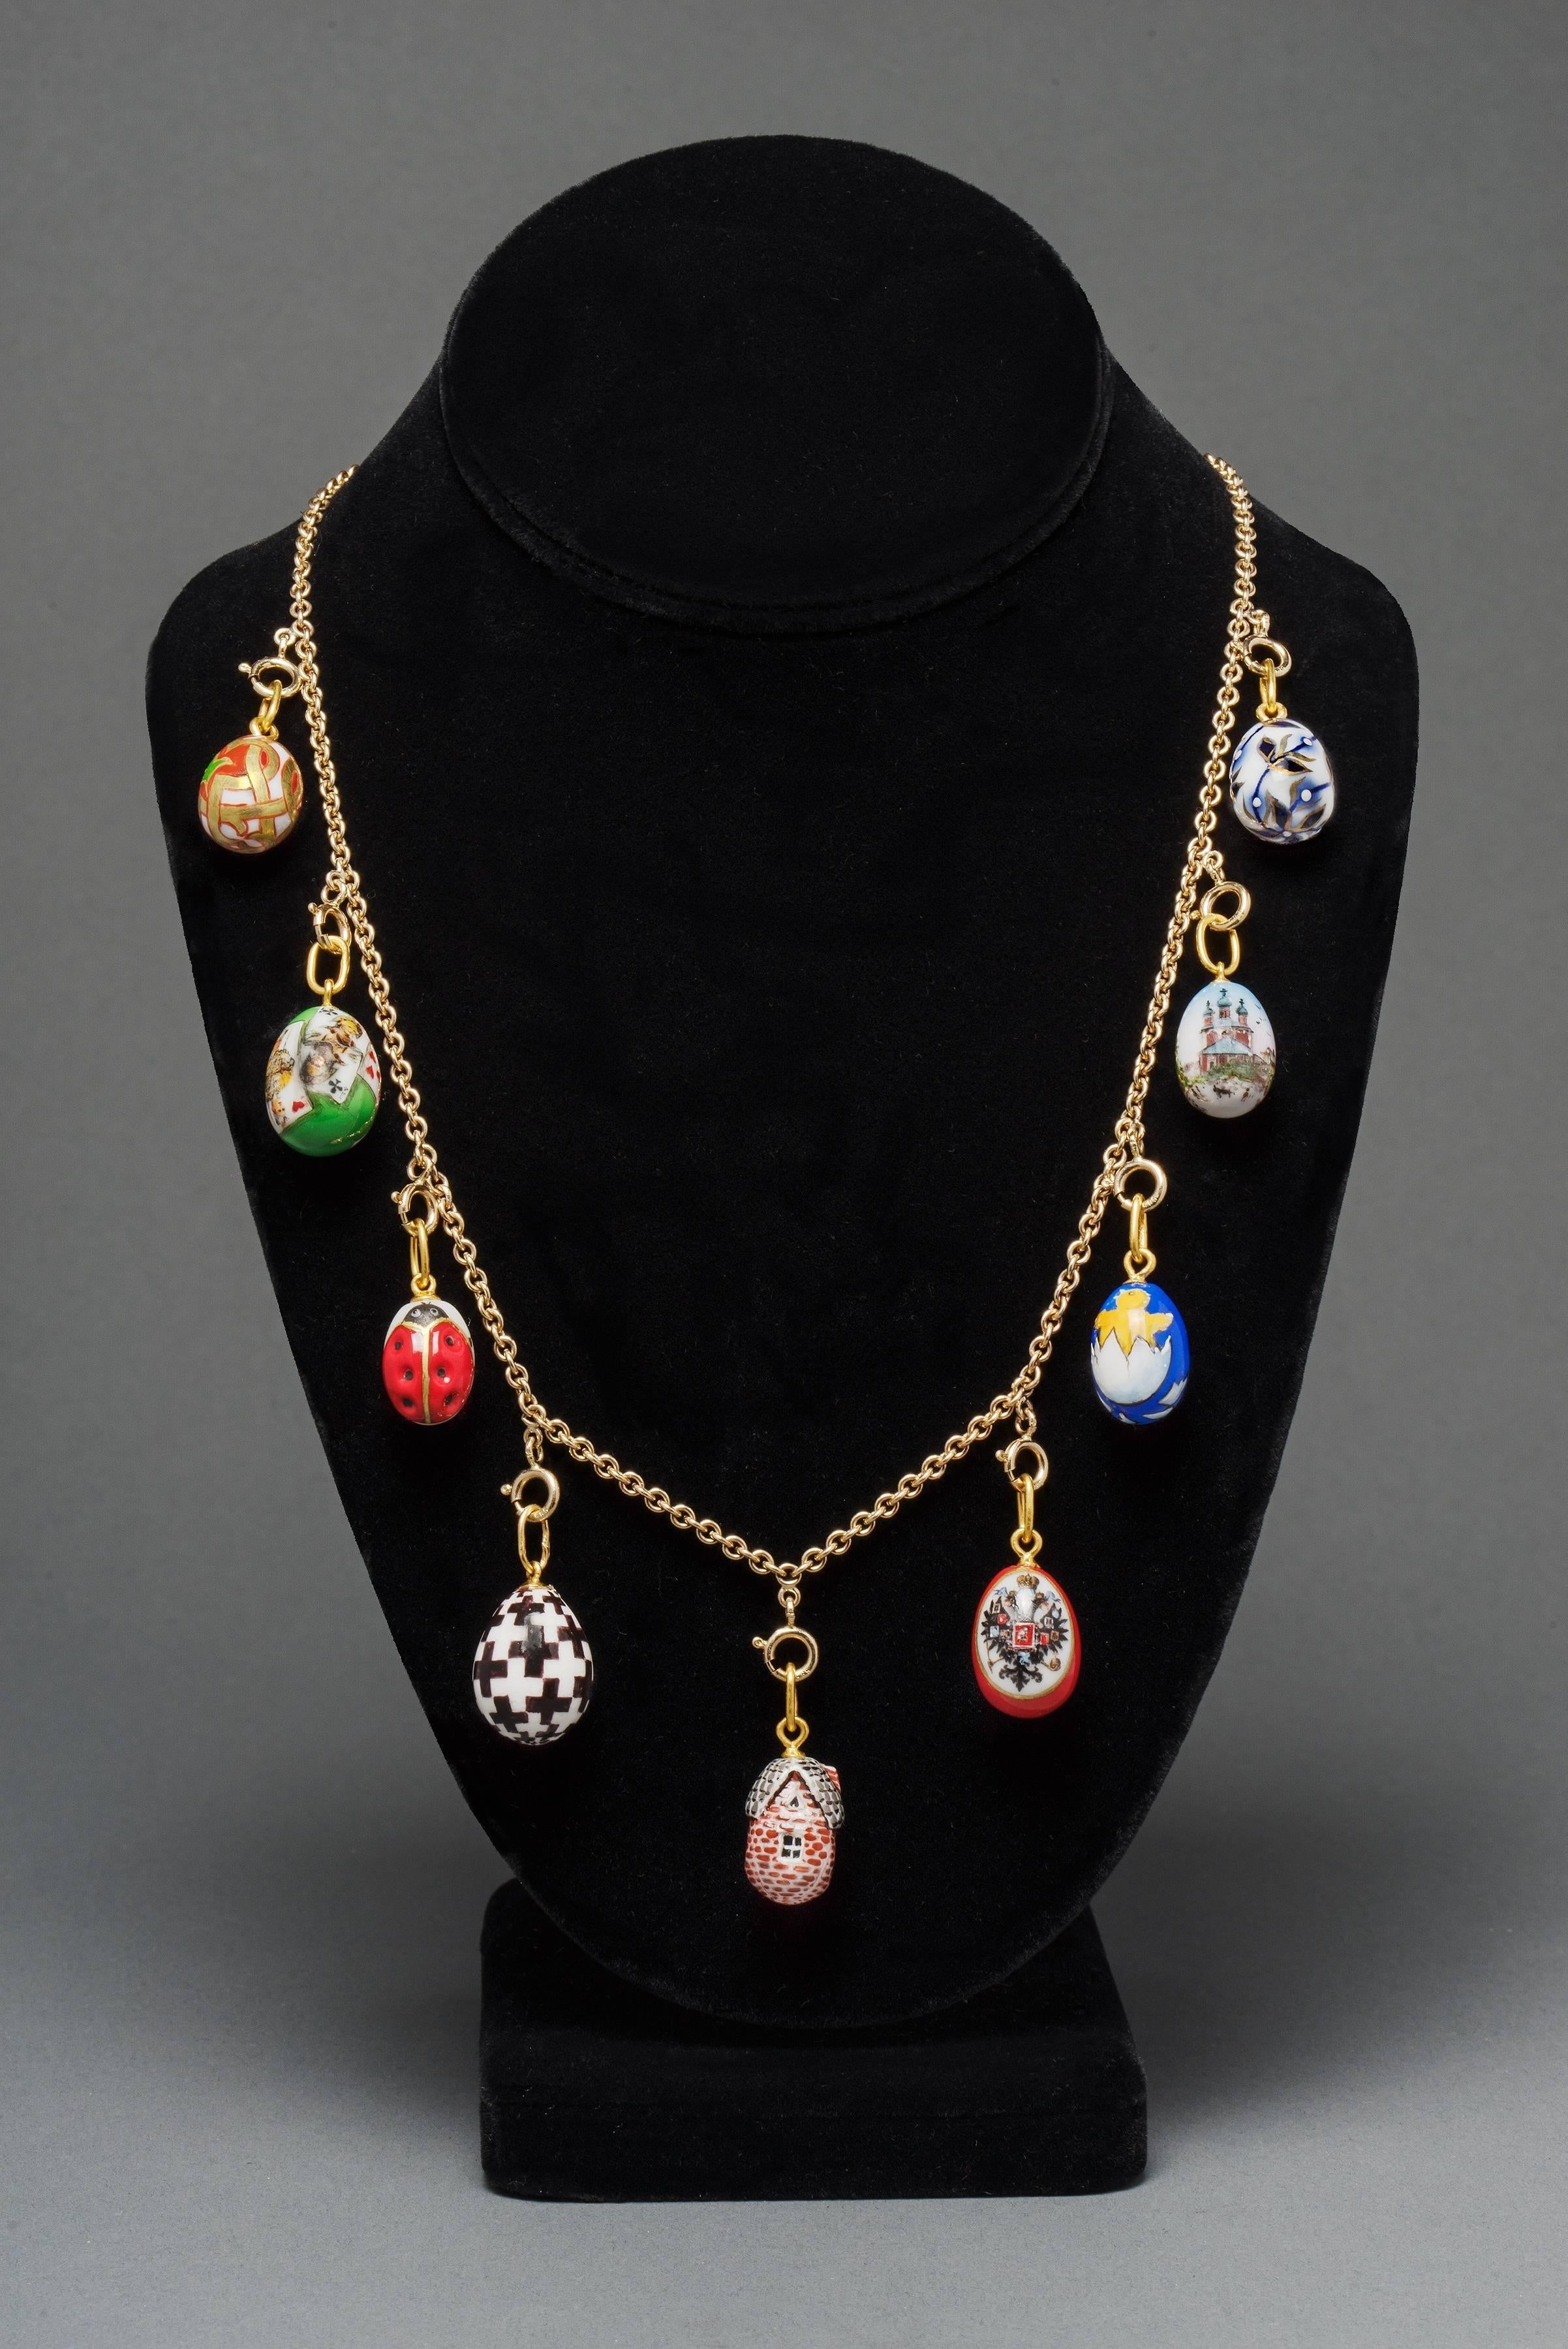 Designed as a classic gold link chain suspending nine hand painted egg pendants from St. Petersburg, Russia. In colorful porcelain depicting a fairy tale dacha with thatched roof, a Romanov double-headed eagle and a landscape of Russian churches